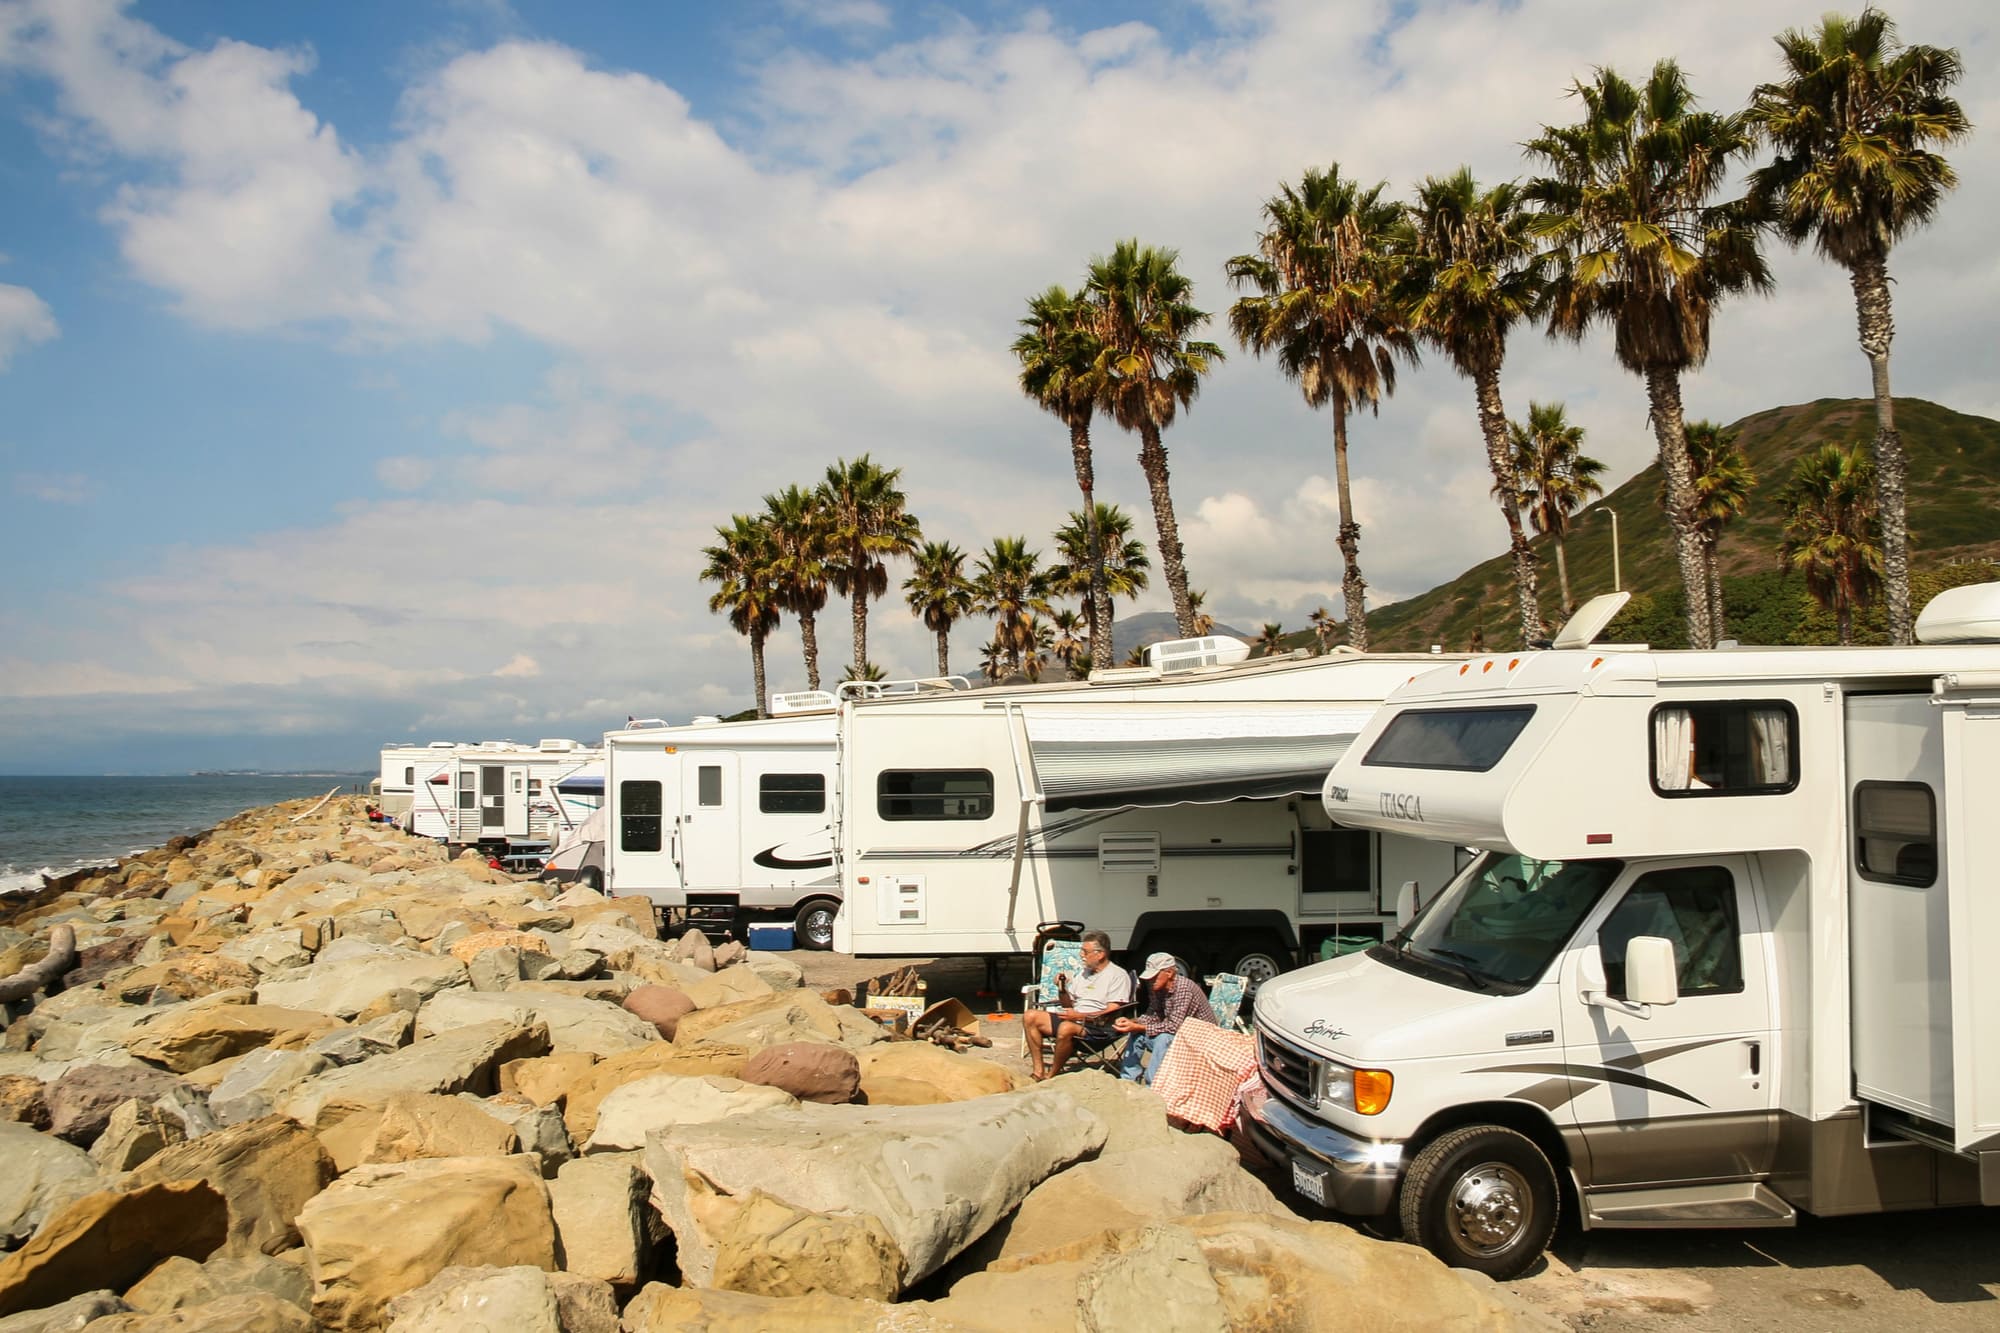 a row of RVs lined up on a beach